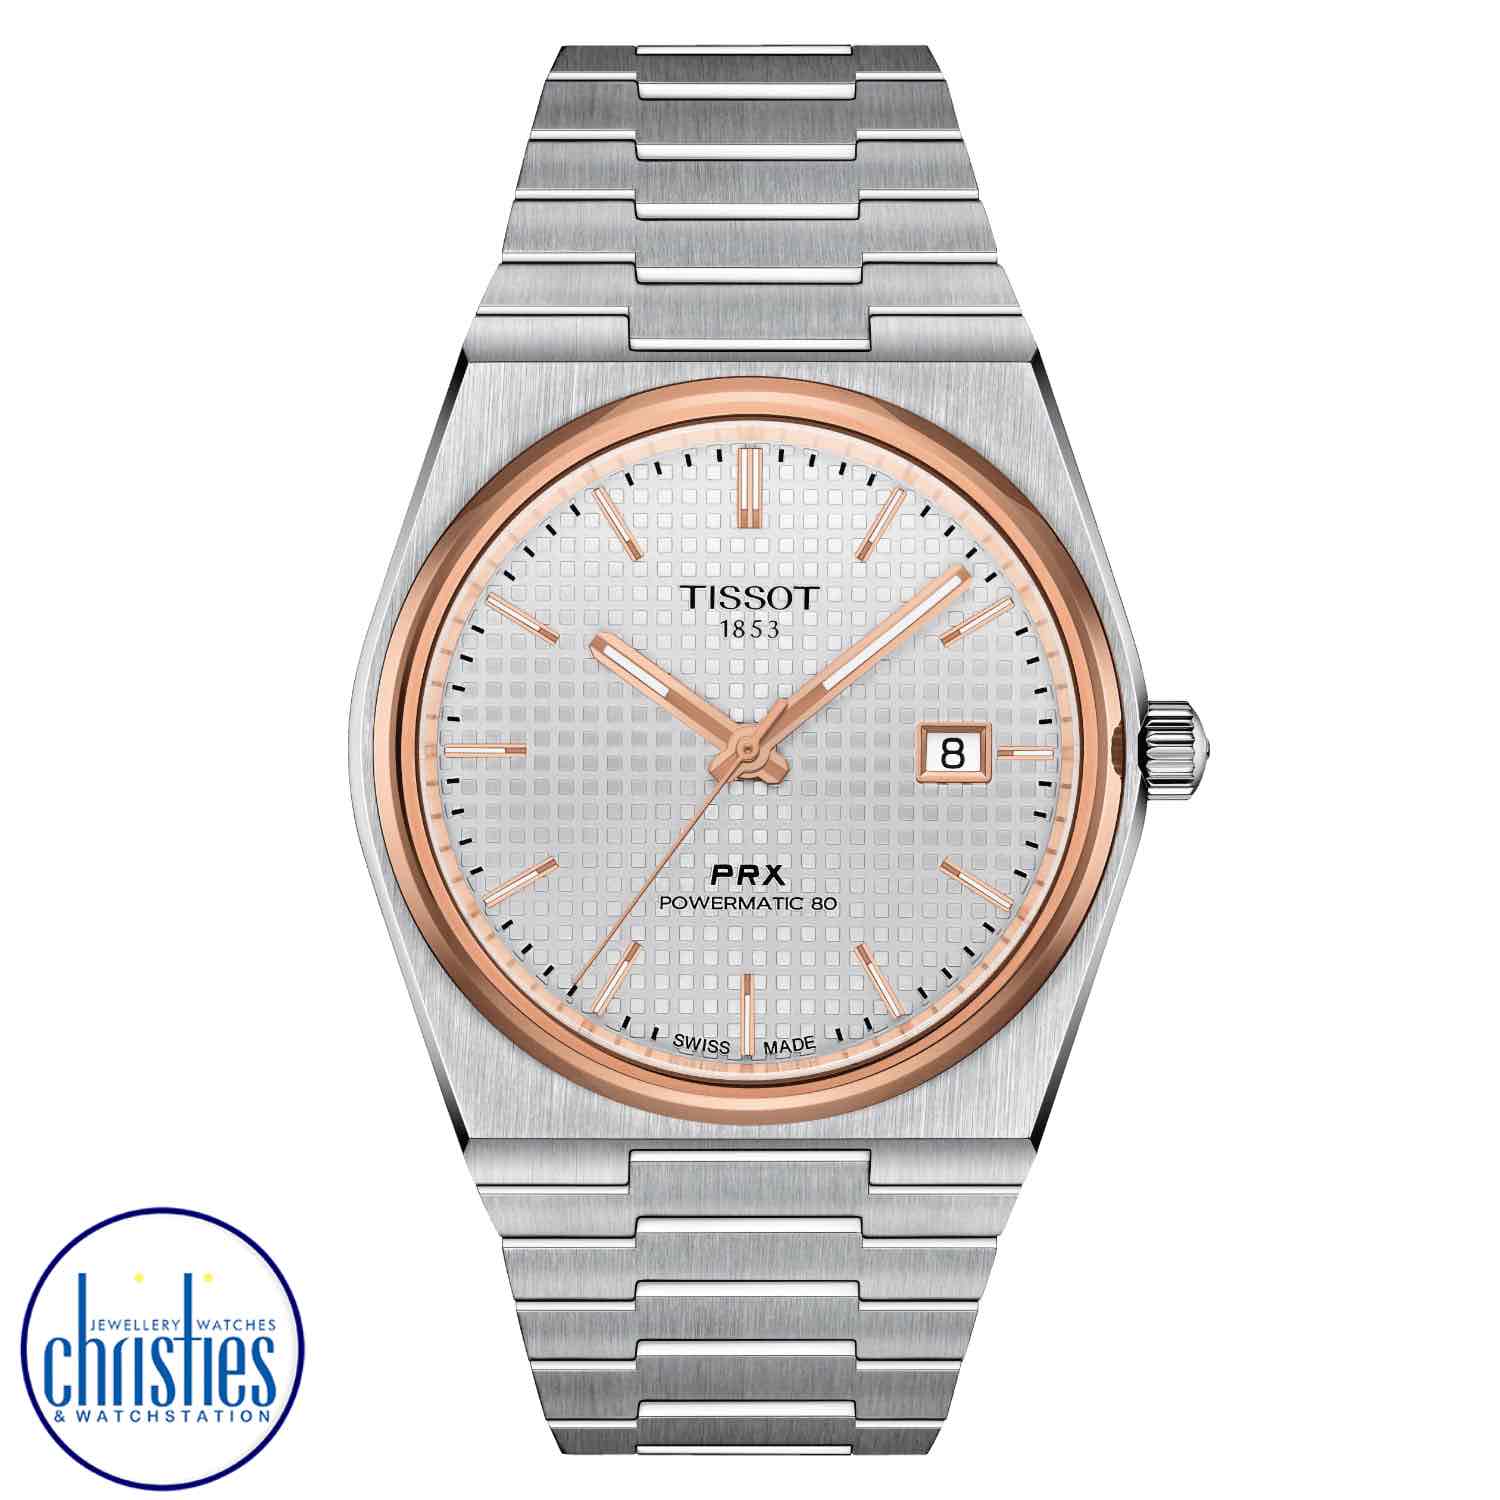 TISSOT PRX Powermatic 80 T1374072103100. If you’re looking for a slim, smooth watch with an authentic ‘70s feel, look no further than the PRX Powermatic 80. tissot nz auckland